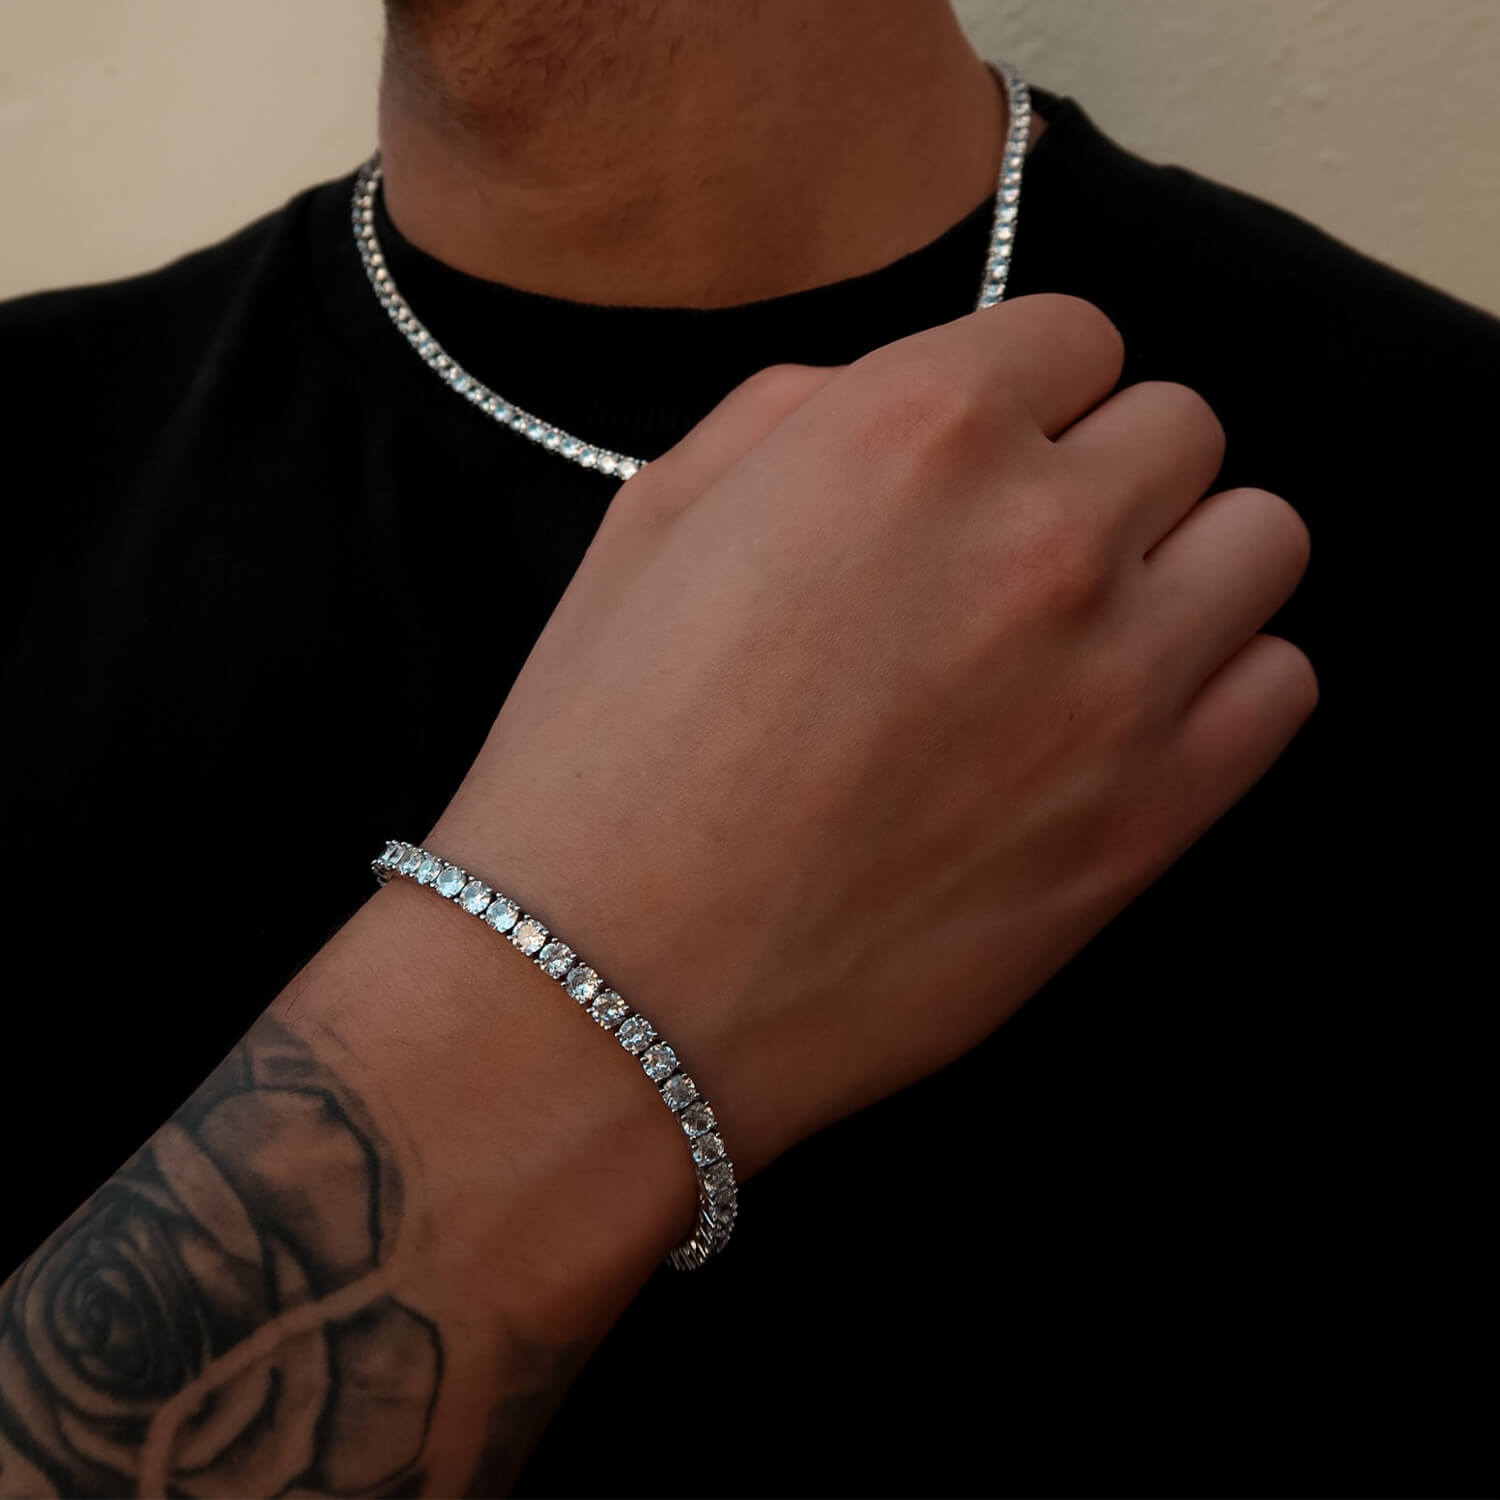 male wearing 4mm tennis bracelet and chain in silver